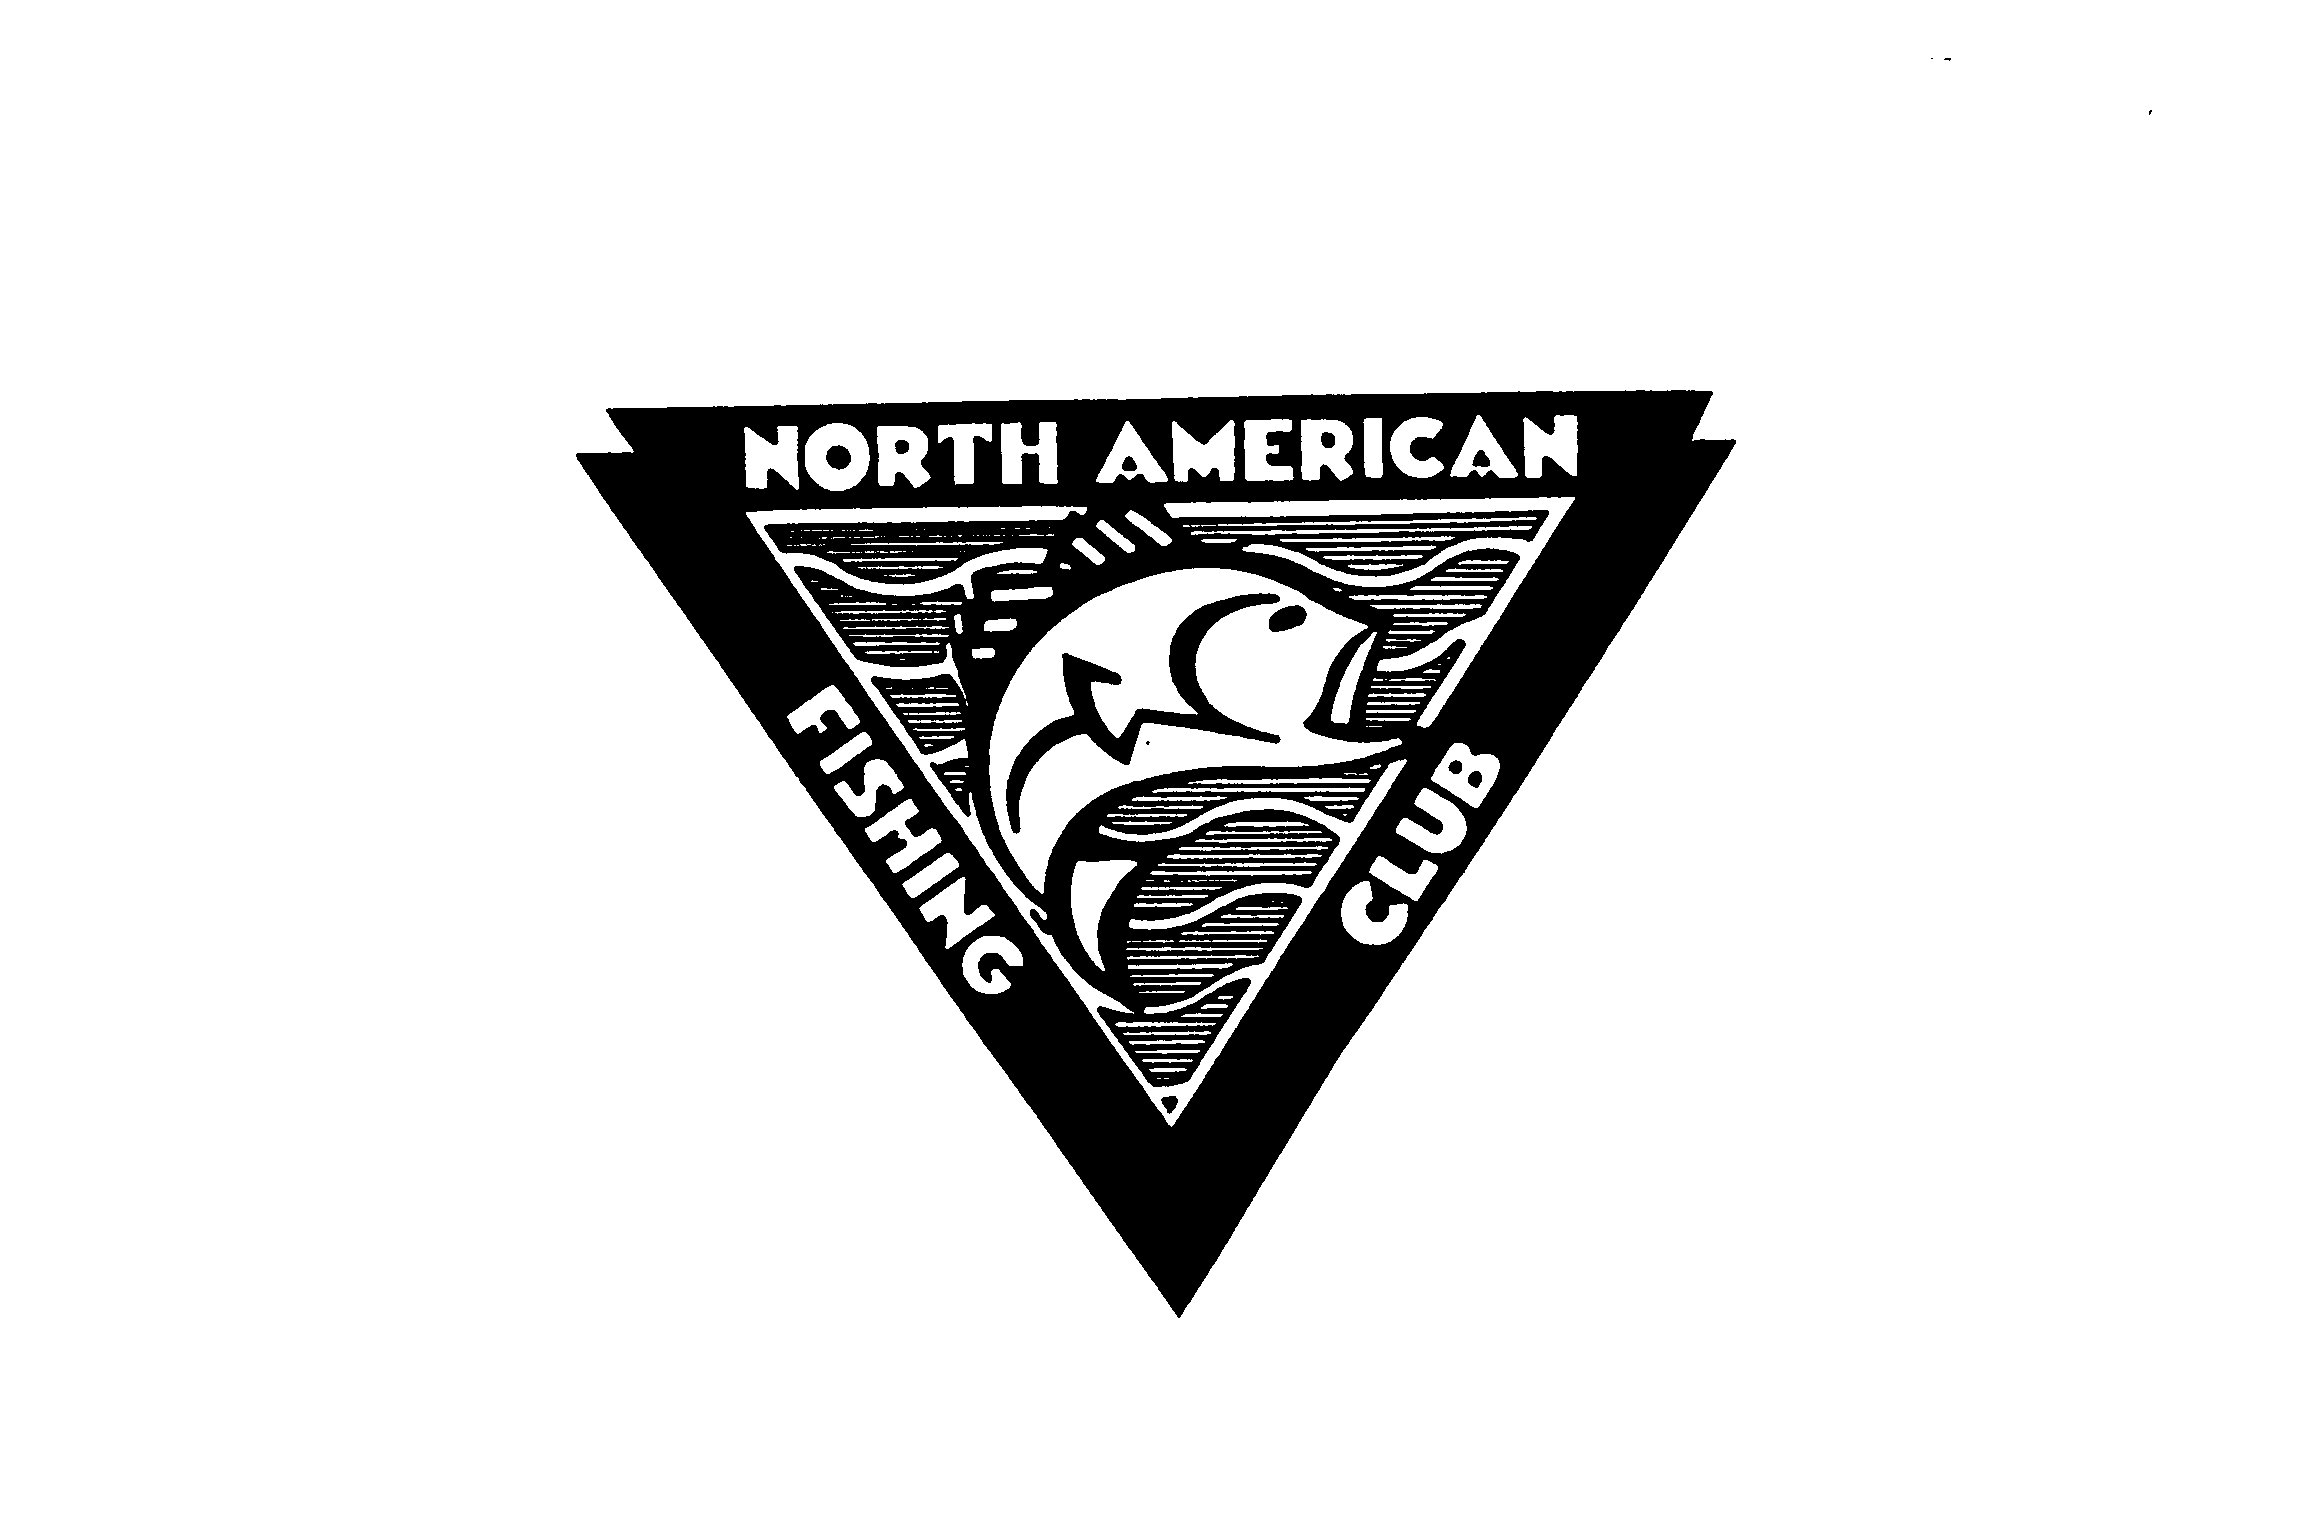 NORTH AMERICAN FISHING CLUB - Scout Media Holdings Inc. Trademark